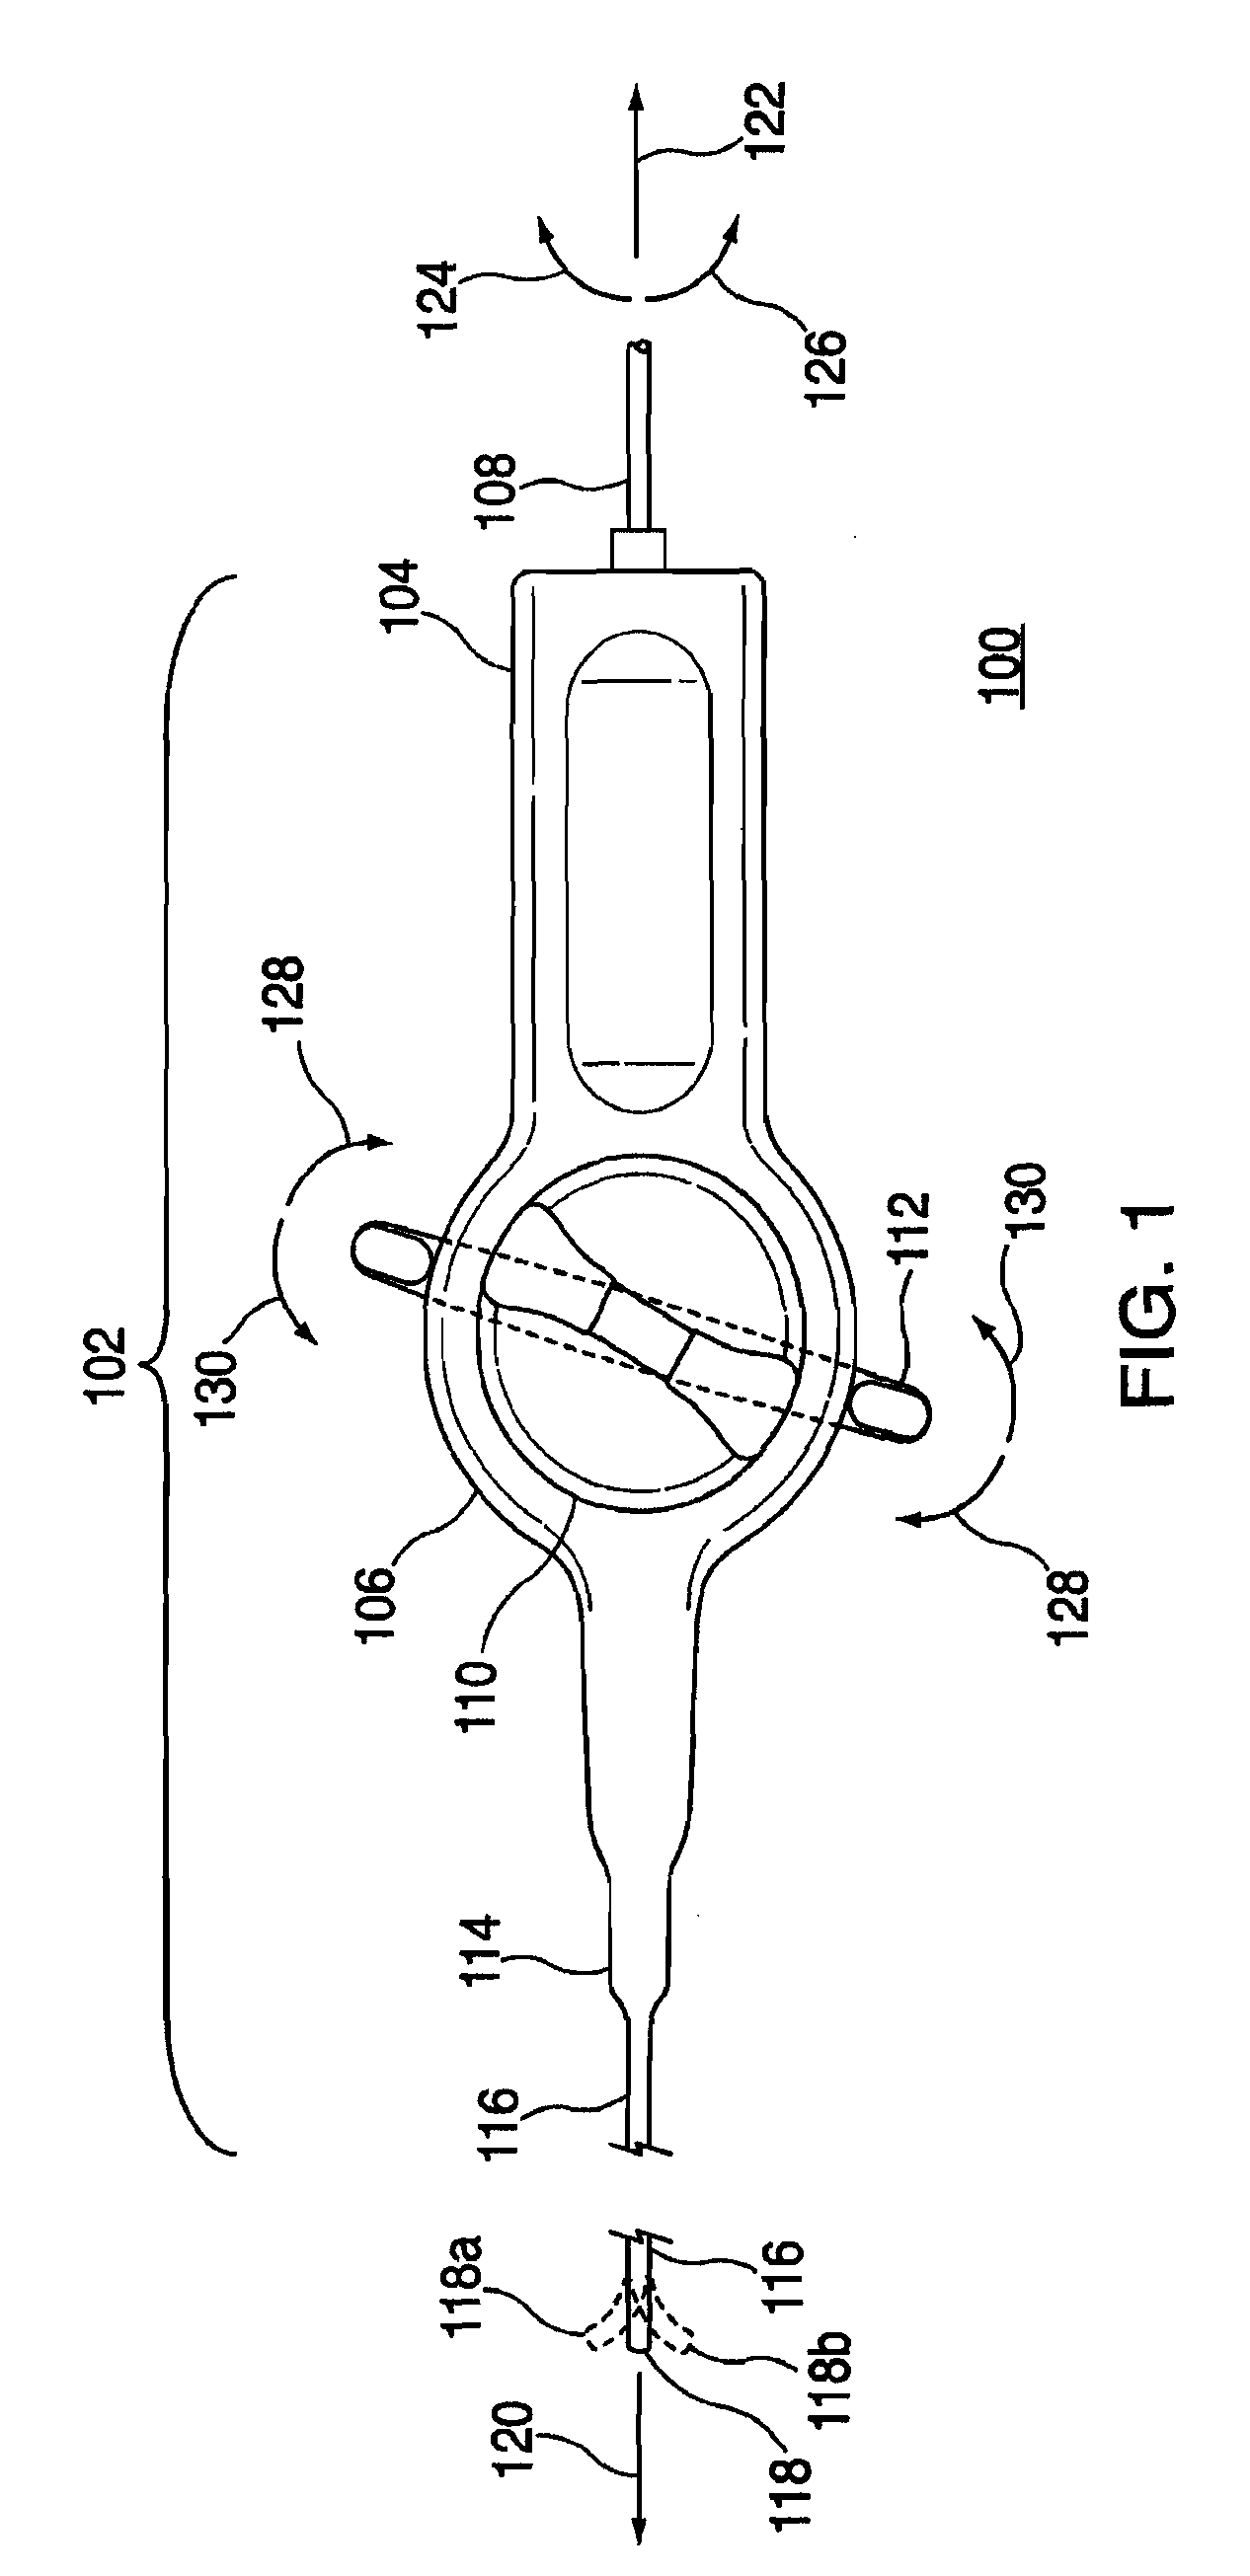 Remotely Controlled Catheter Insertion System